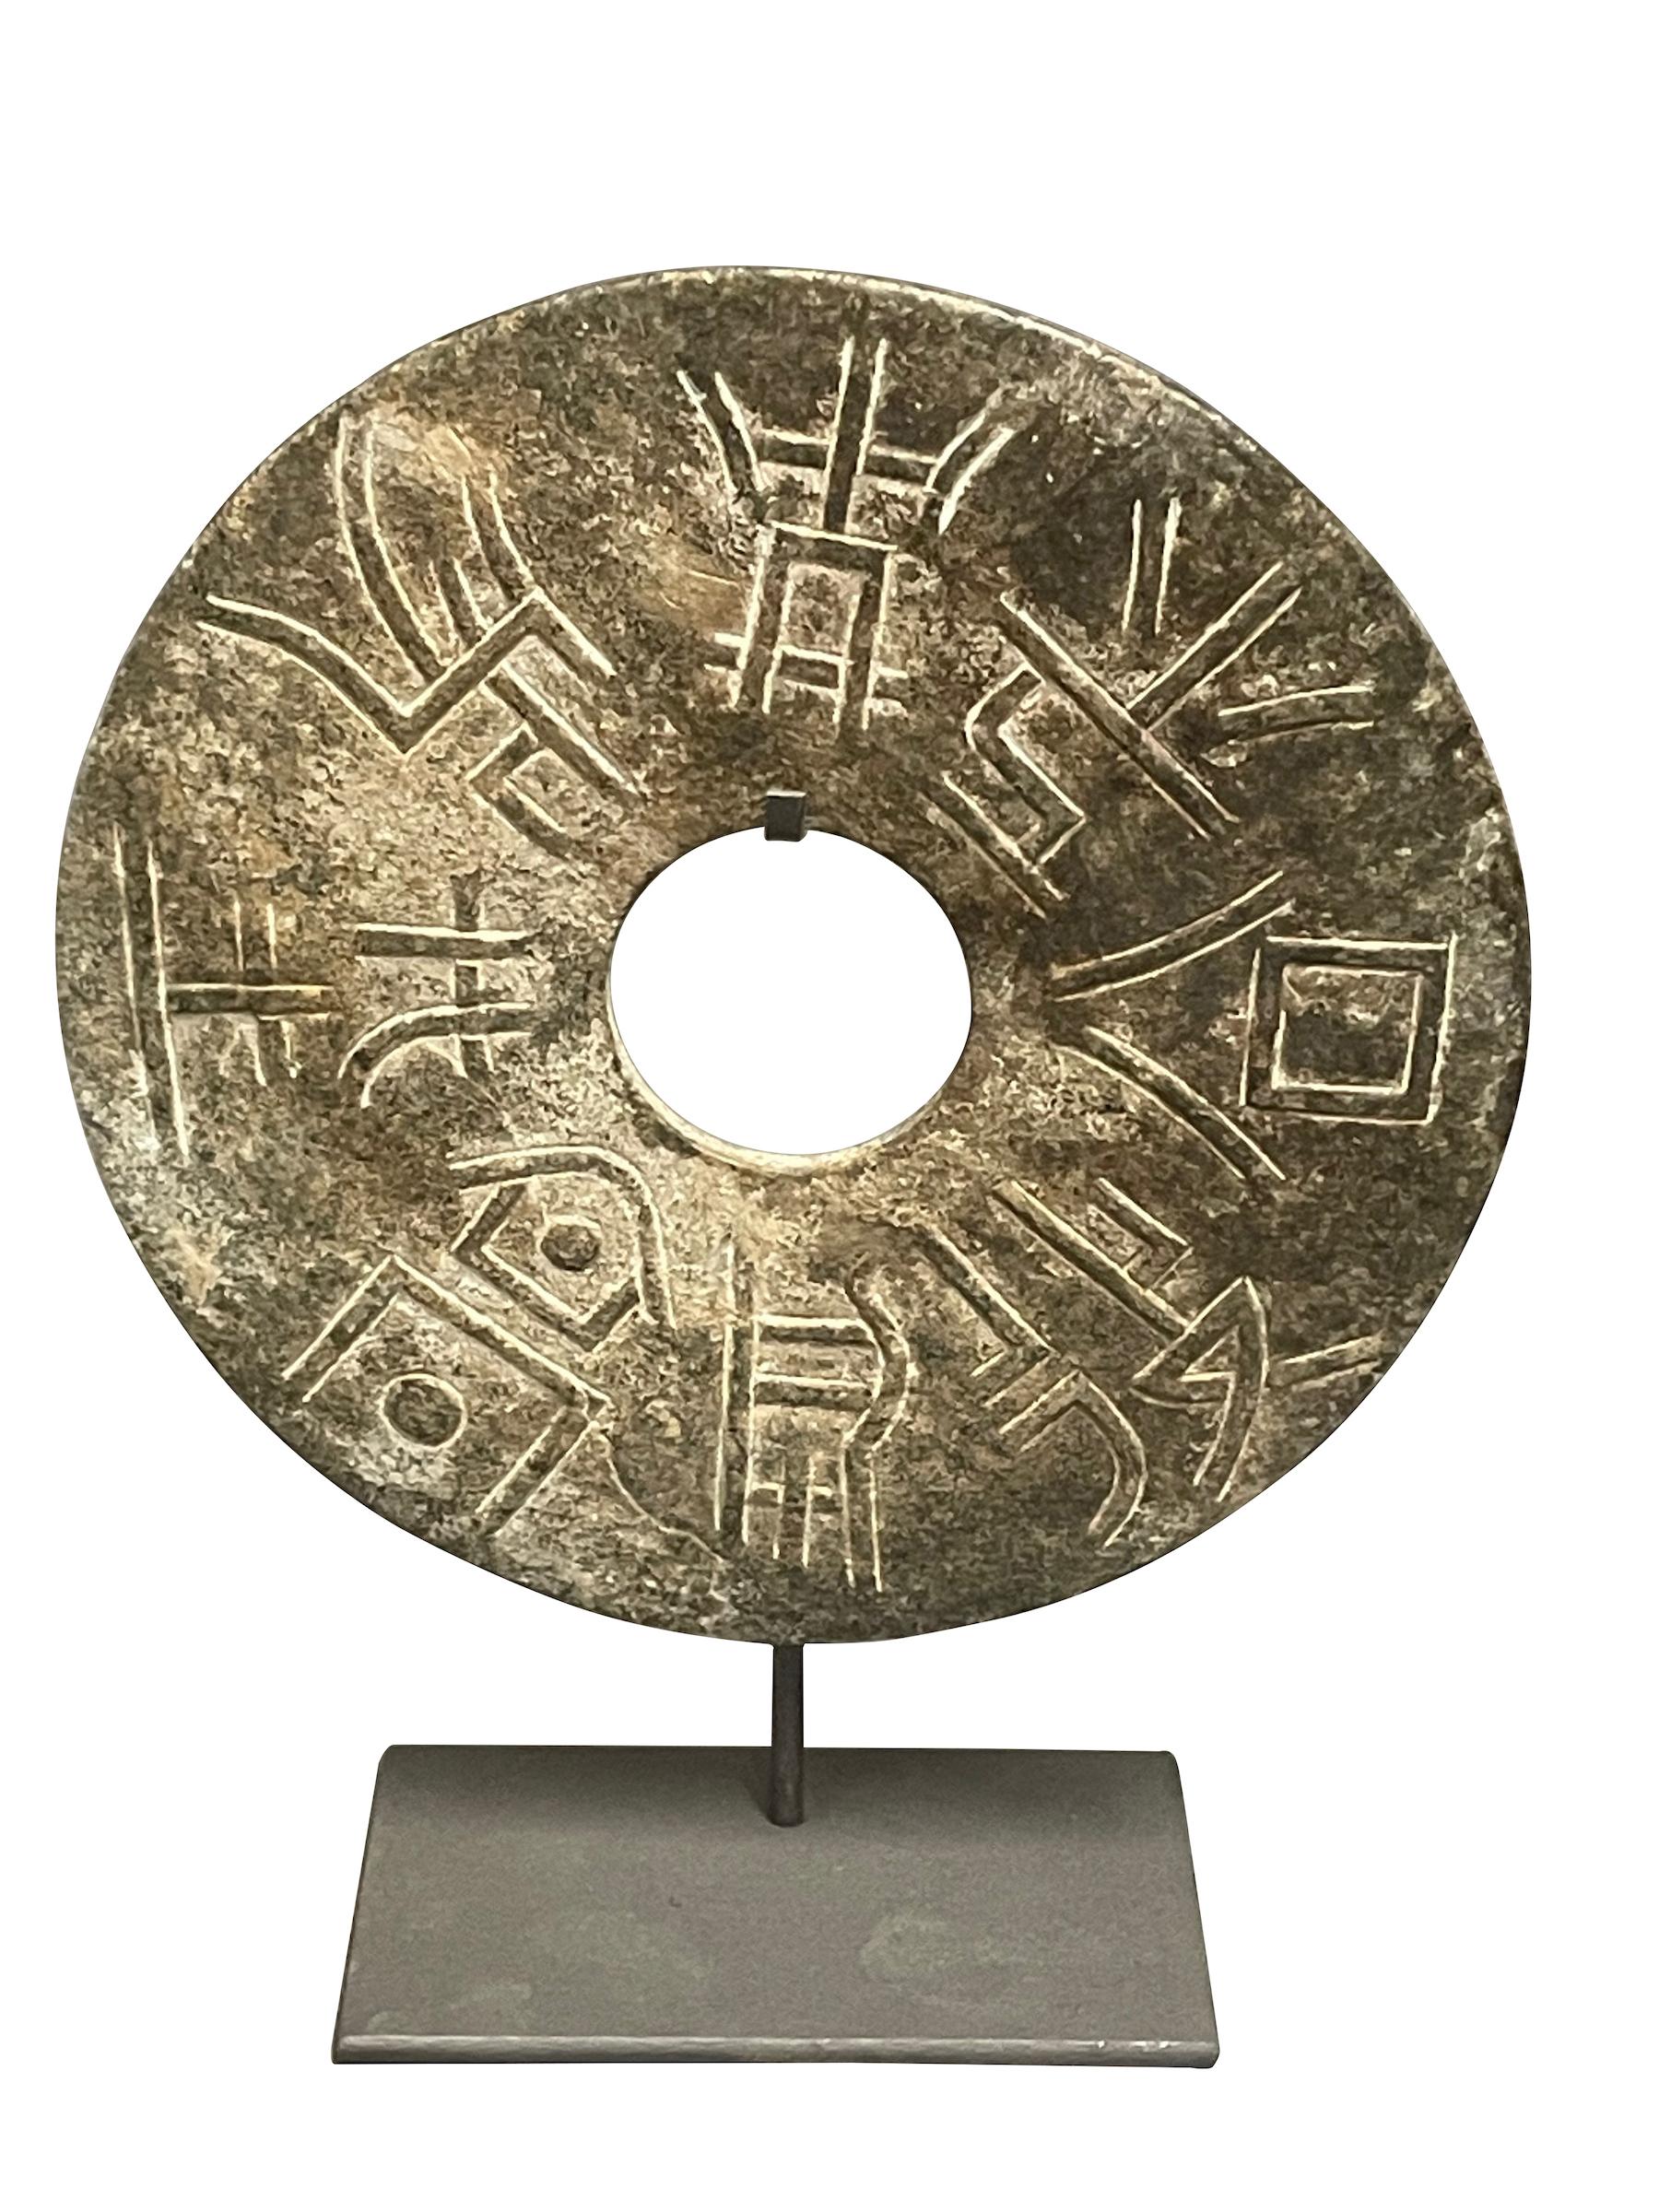 Contemporary Chinese single textured jade disc on metal stand.
Mottled moss green in color.
Stand measures  6  x  4
Sits well with hand carved stone semi circle with capital motif.
Sits well with hand carved abstract stone bird.
ARRIVING APRIL